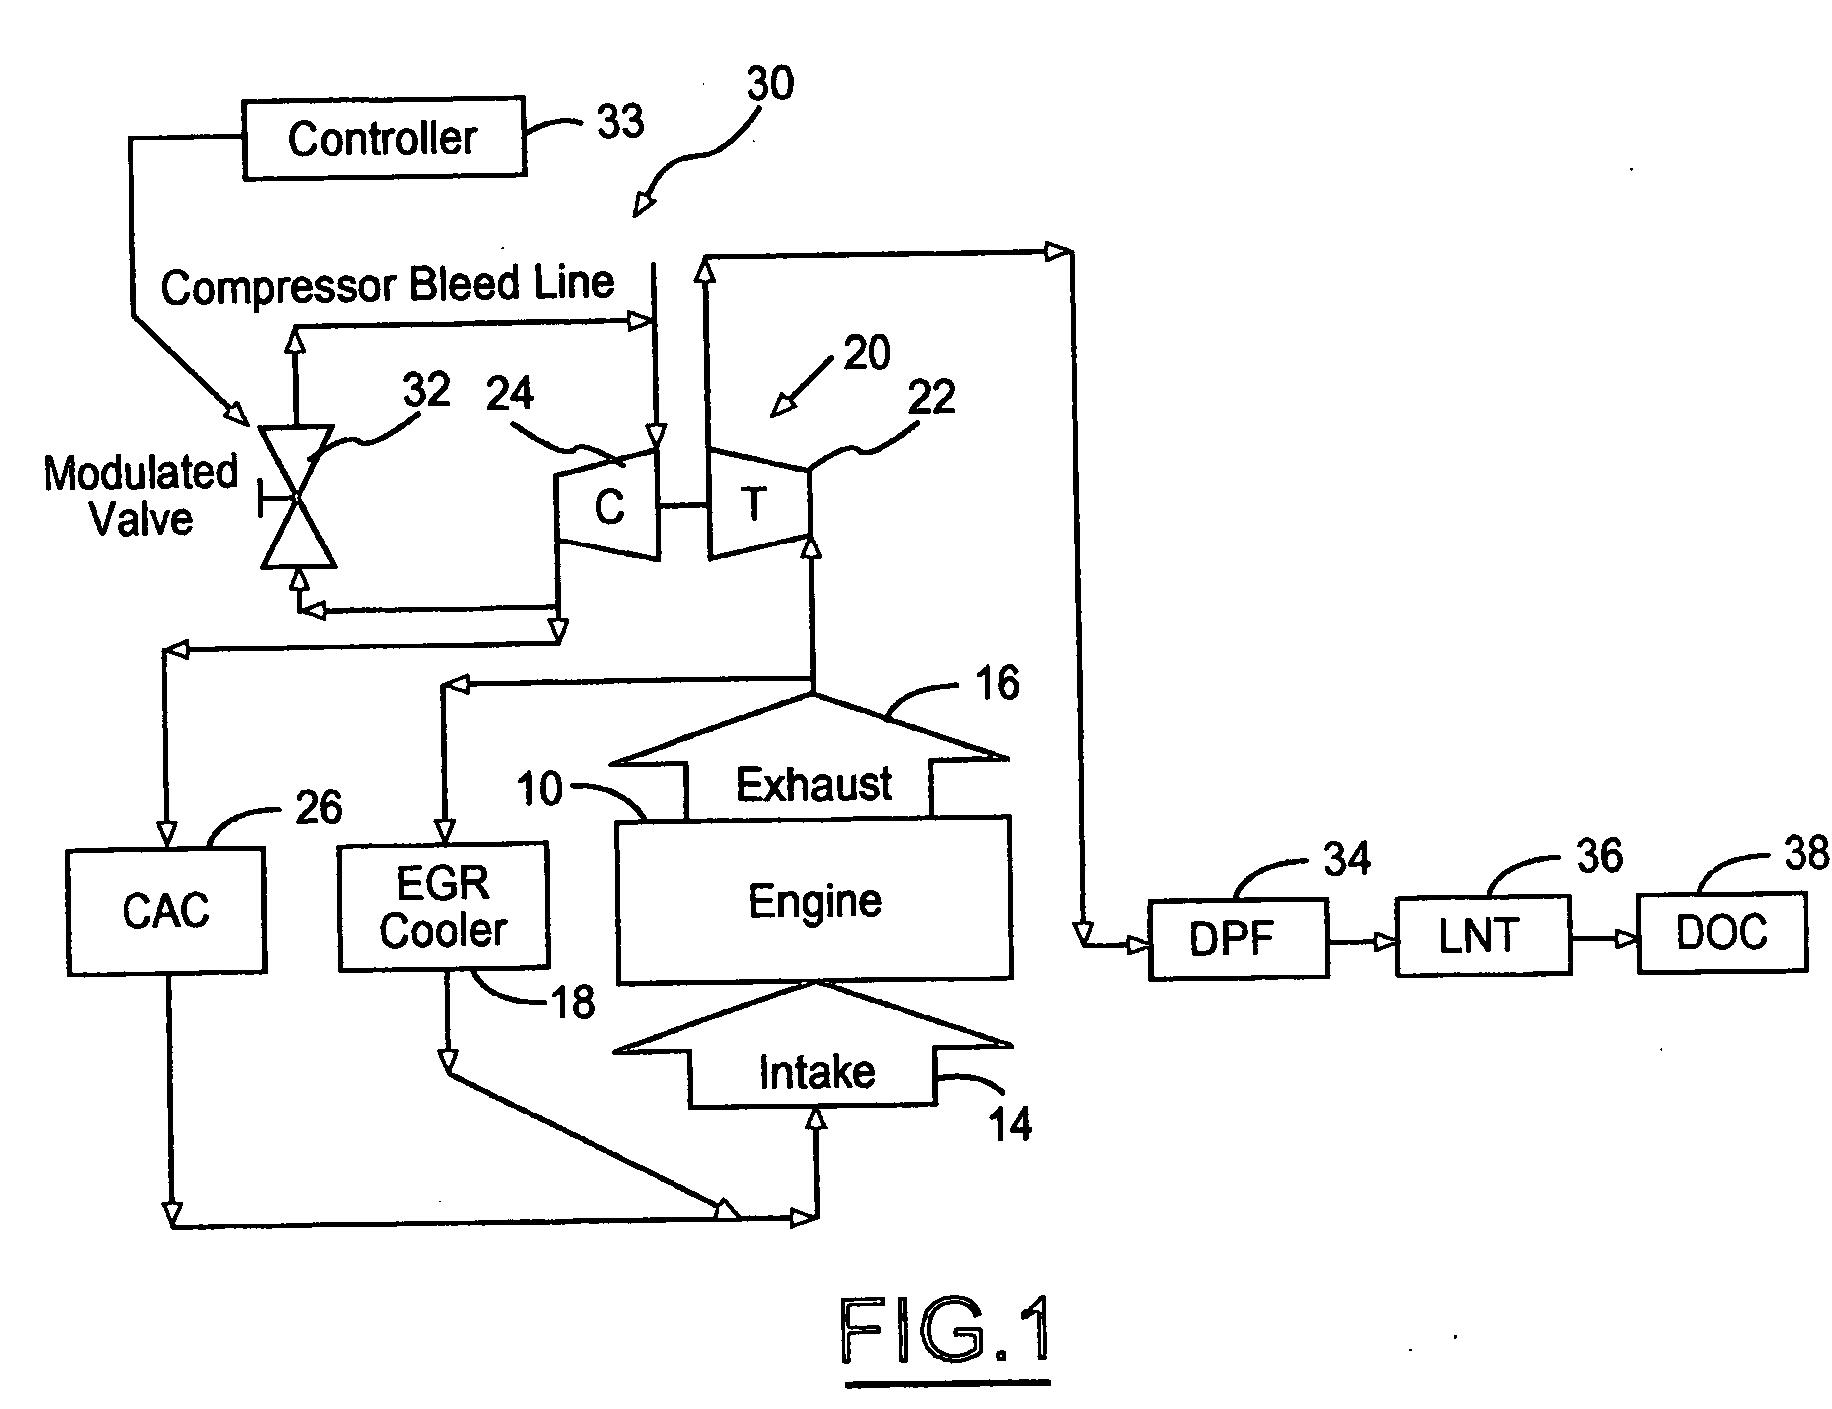 Method for controlling engine air/fuel ratio